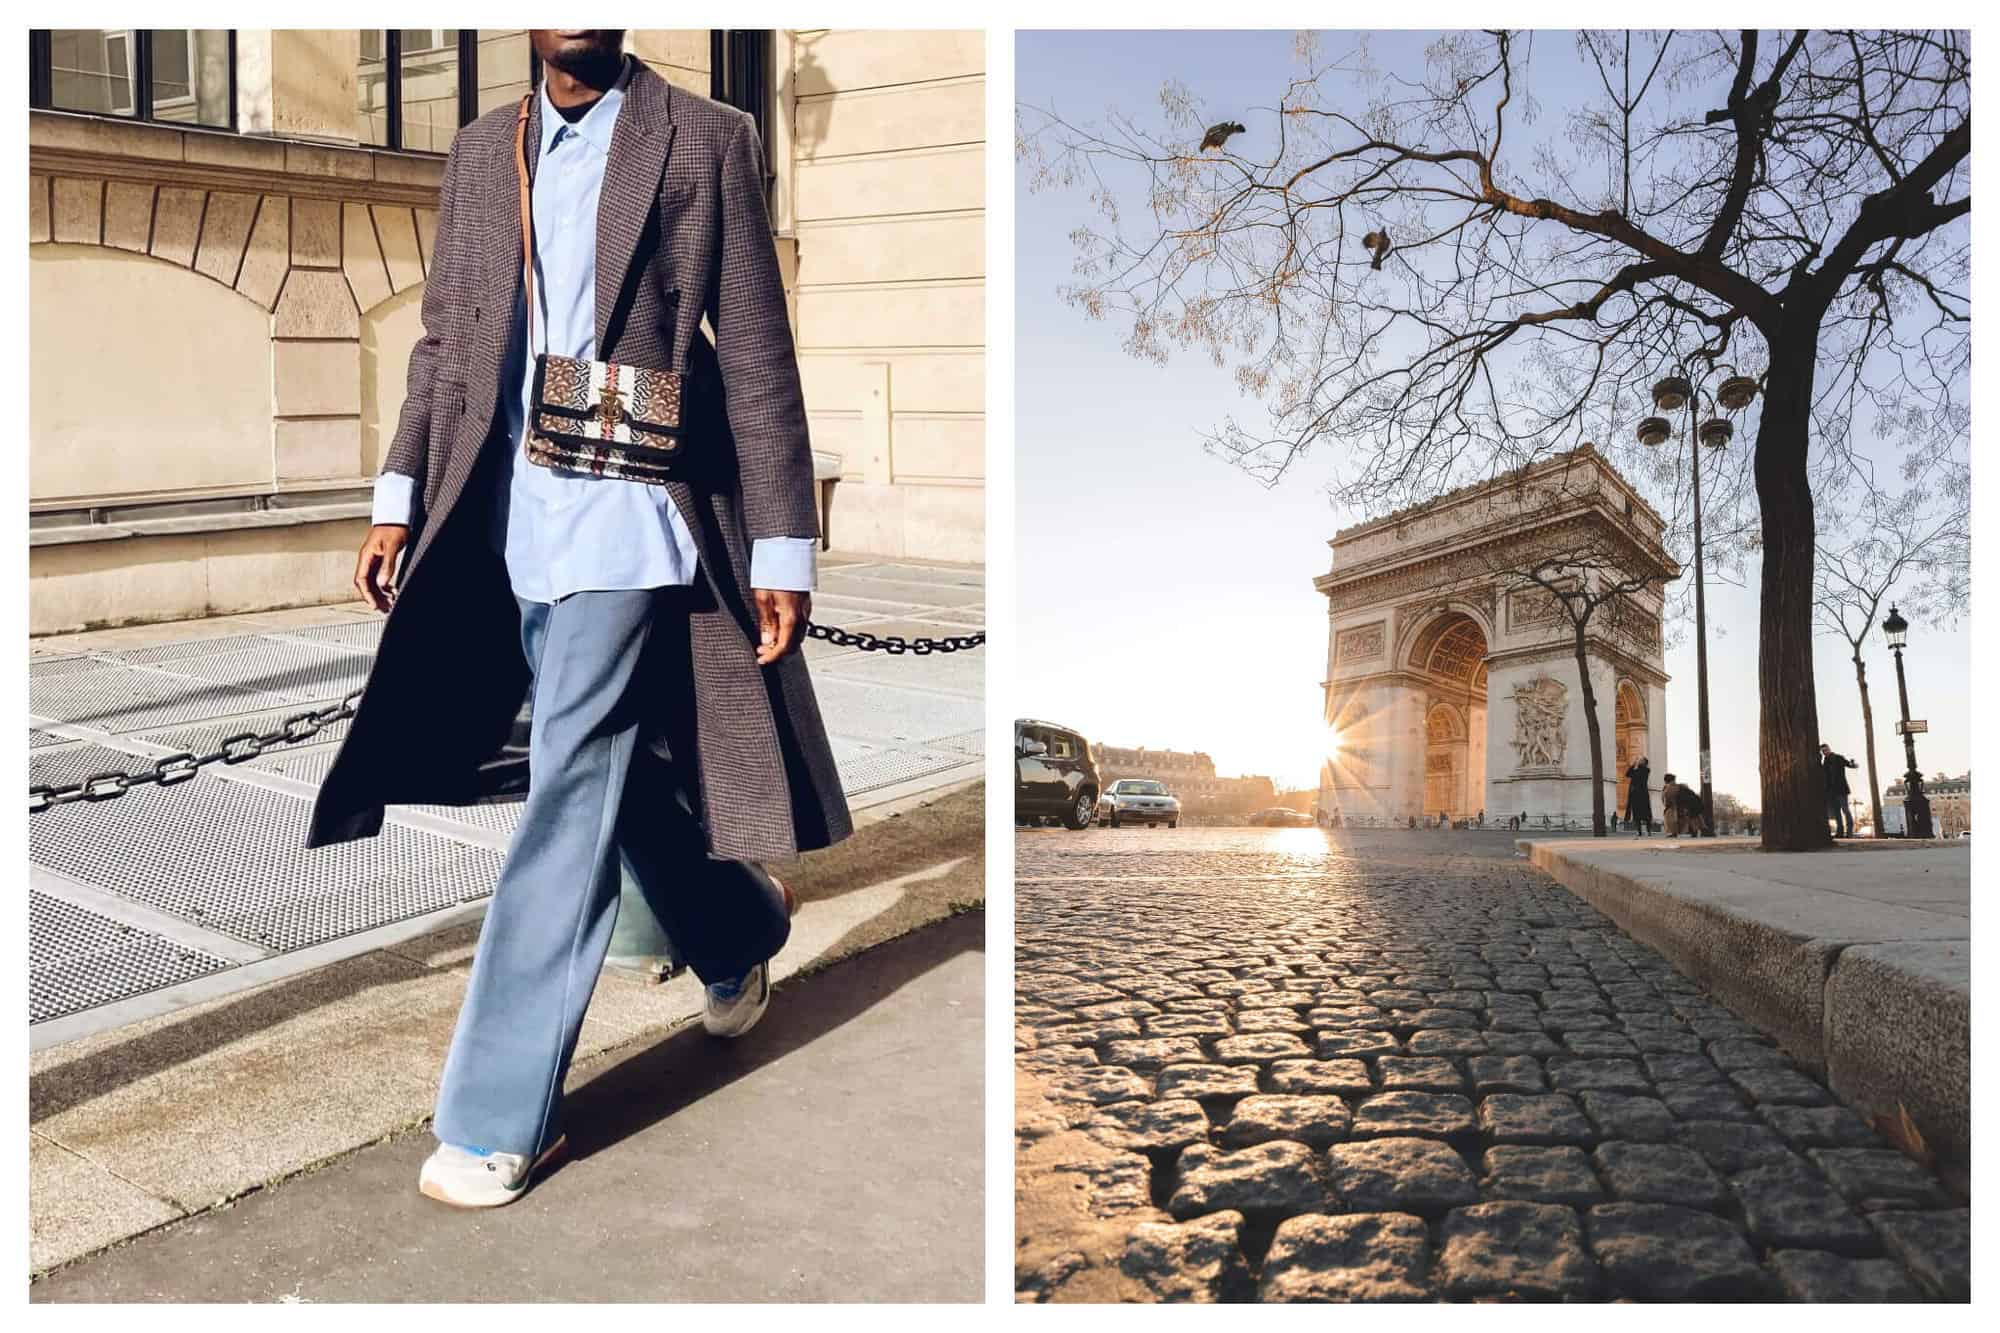 Left: A man is walking in his blue shirt, blue jeans, and dark coat. Right: A lovely morning picture of the Arc de Triomphe on a winter day.